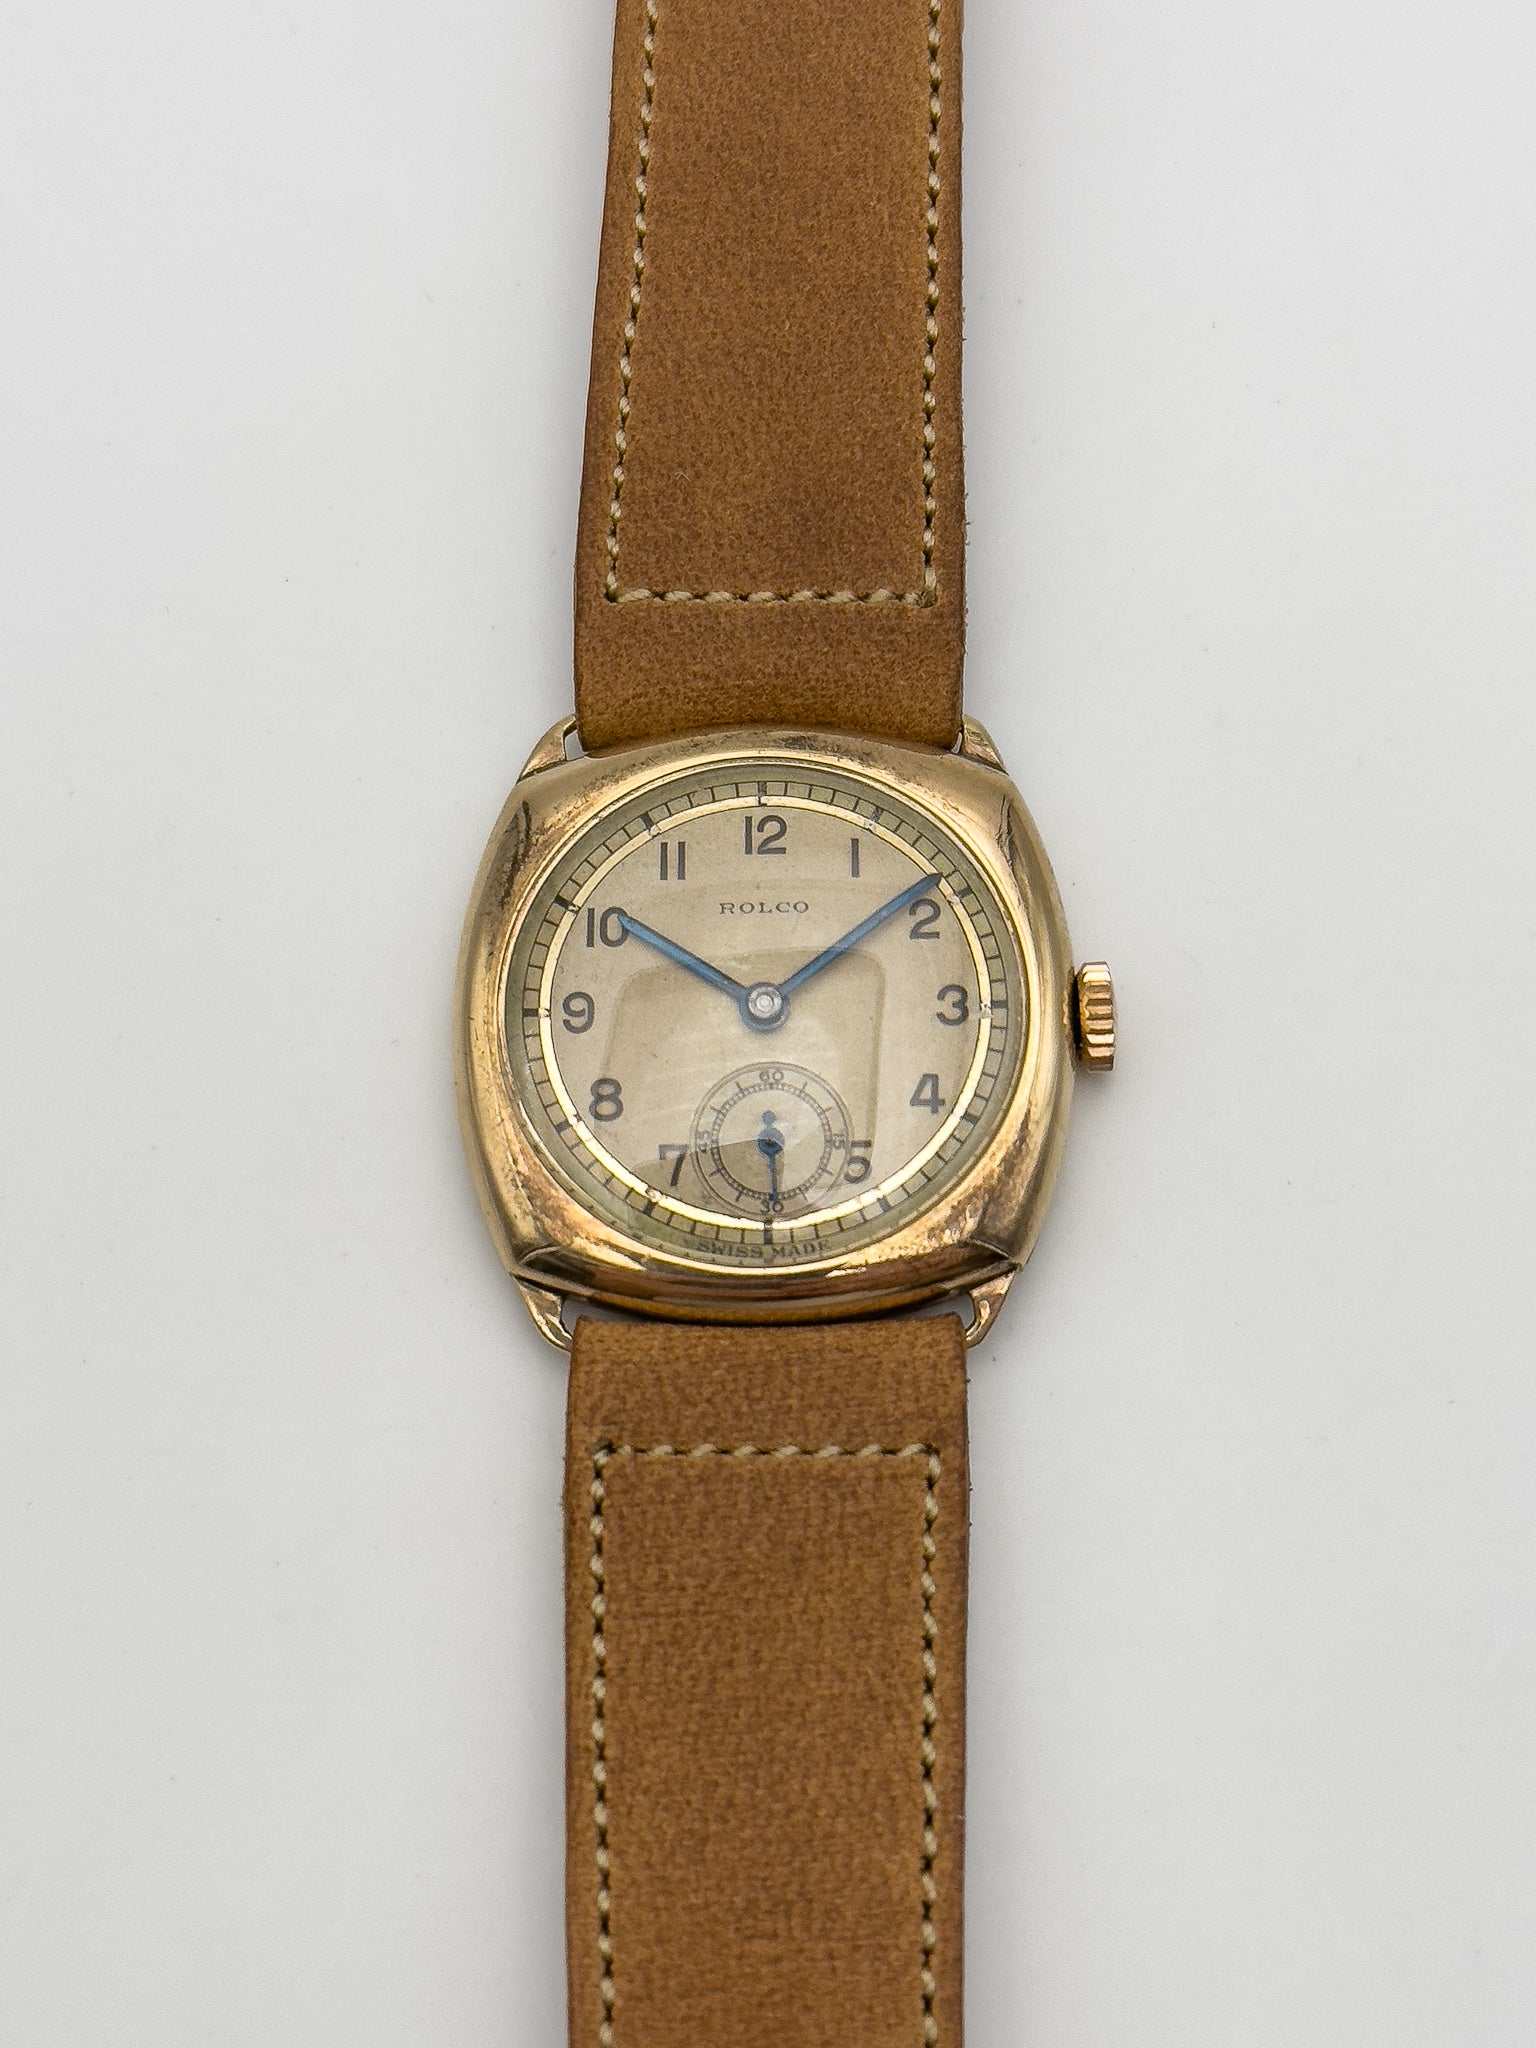 Rolco by Rolex - Coussin 9k - 1930’s - Atelier Victor